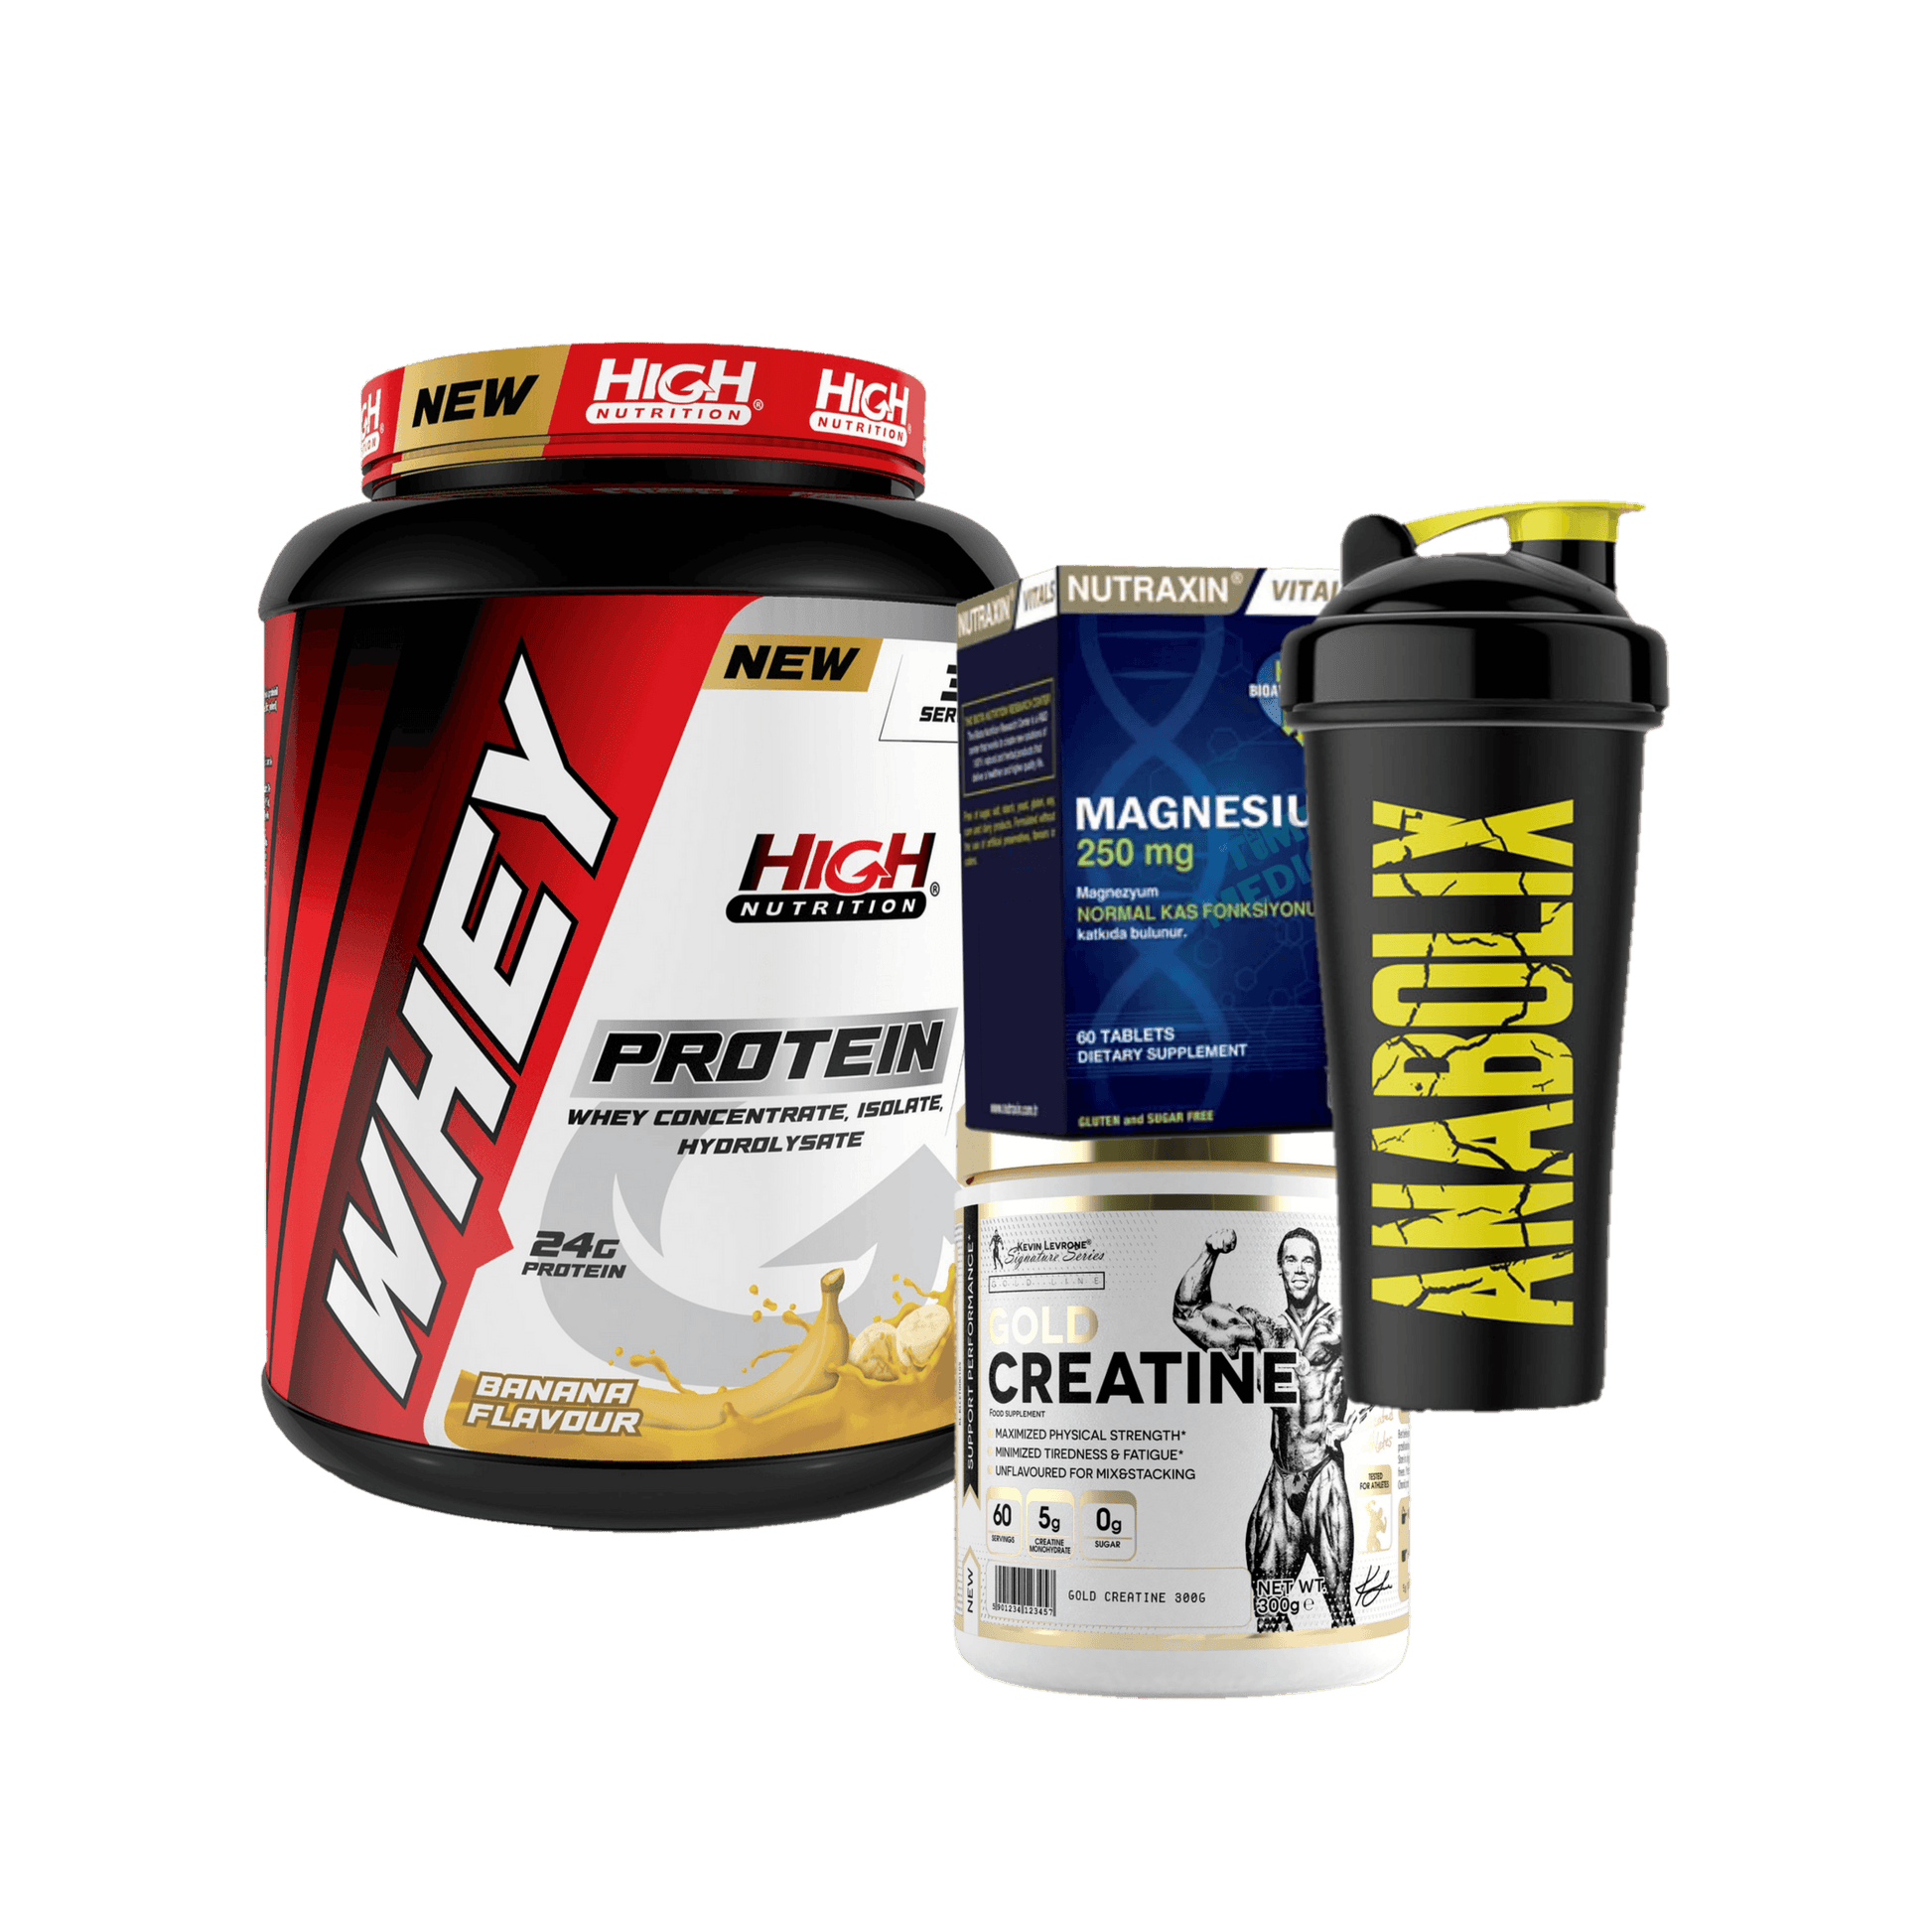 High Whey / Gold Creatine / Shaker - The Supplements Factory